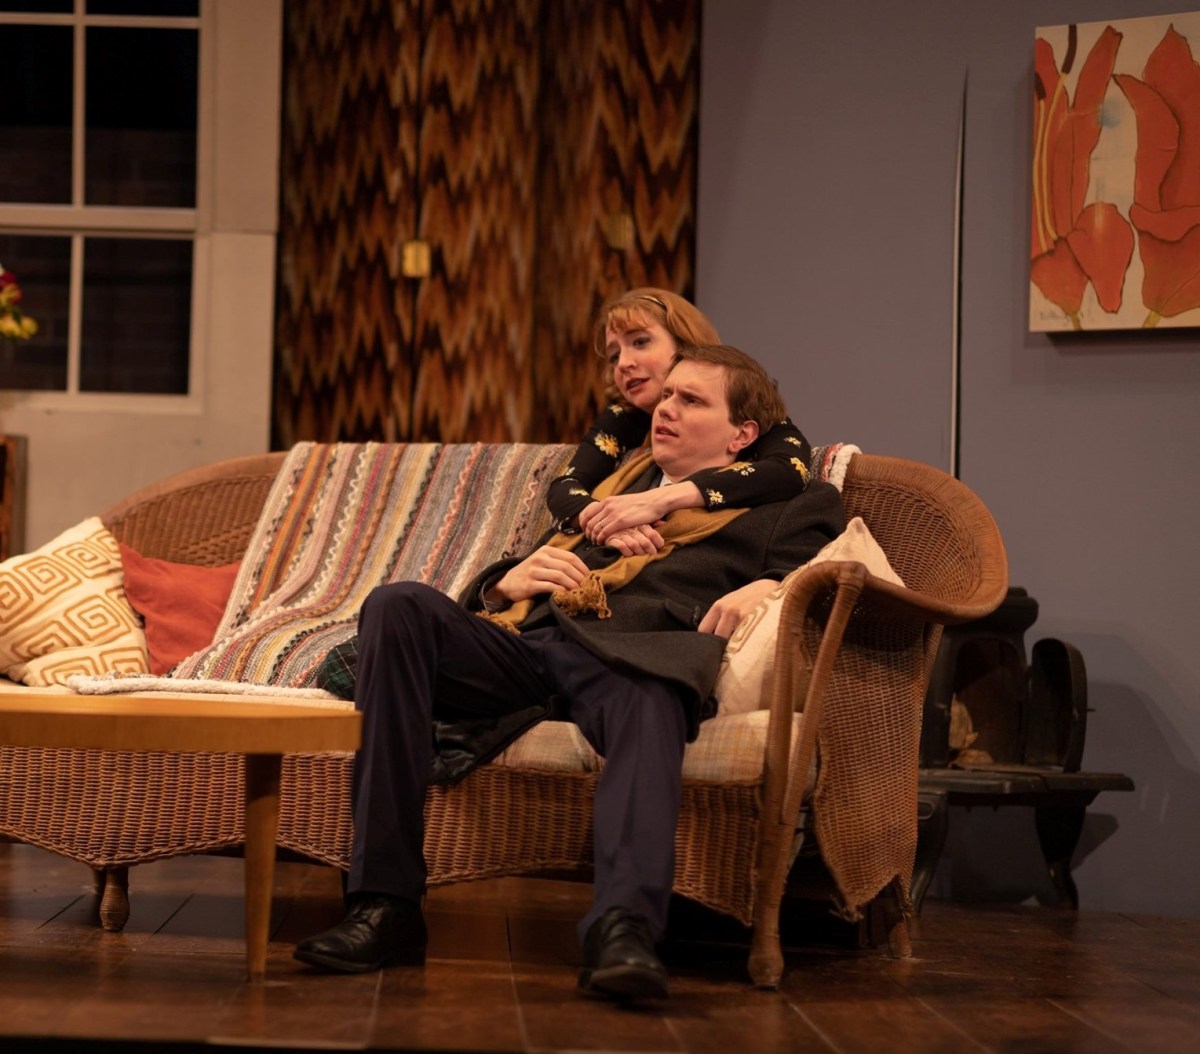 Carey Cox Spencer Lackey Barefoot in the Park photo courtesy Queens Theatre (2)